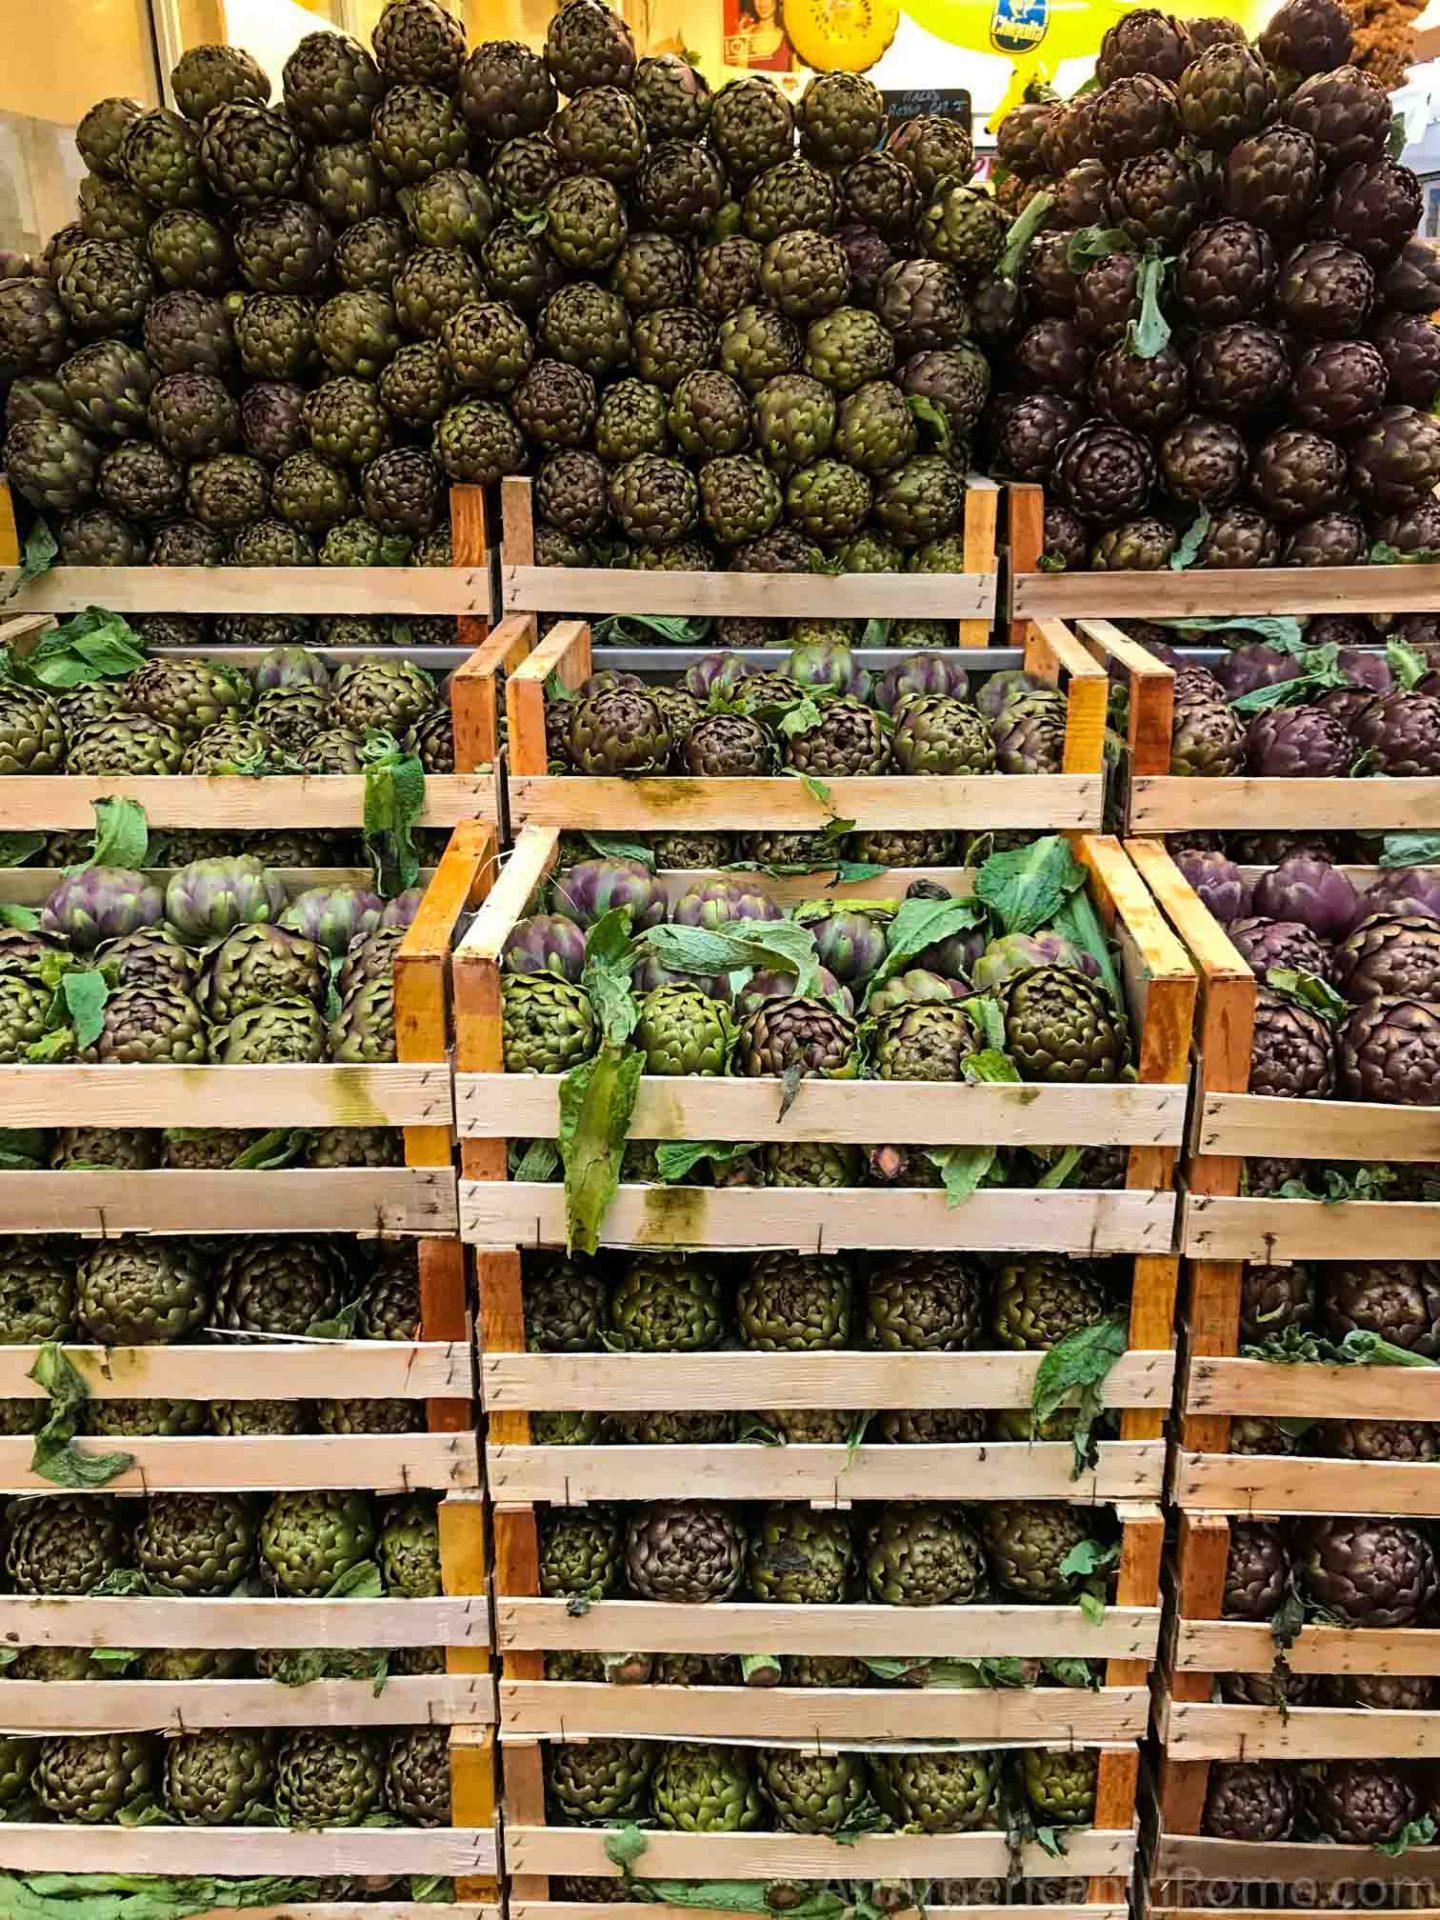 stacked crates and rows of artichokes in Rome